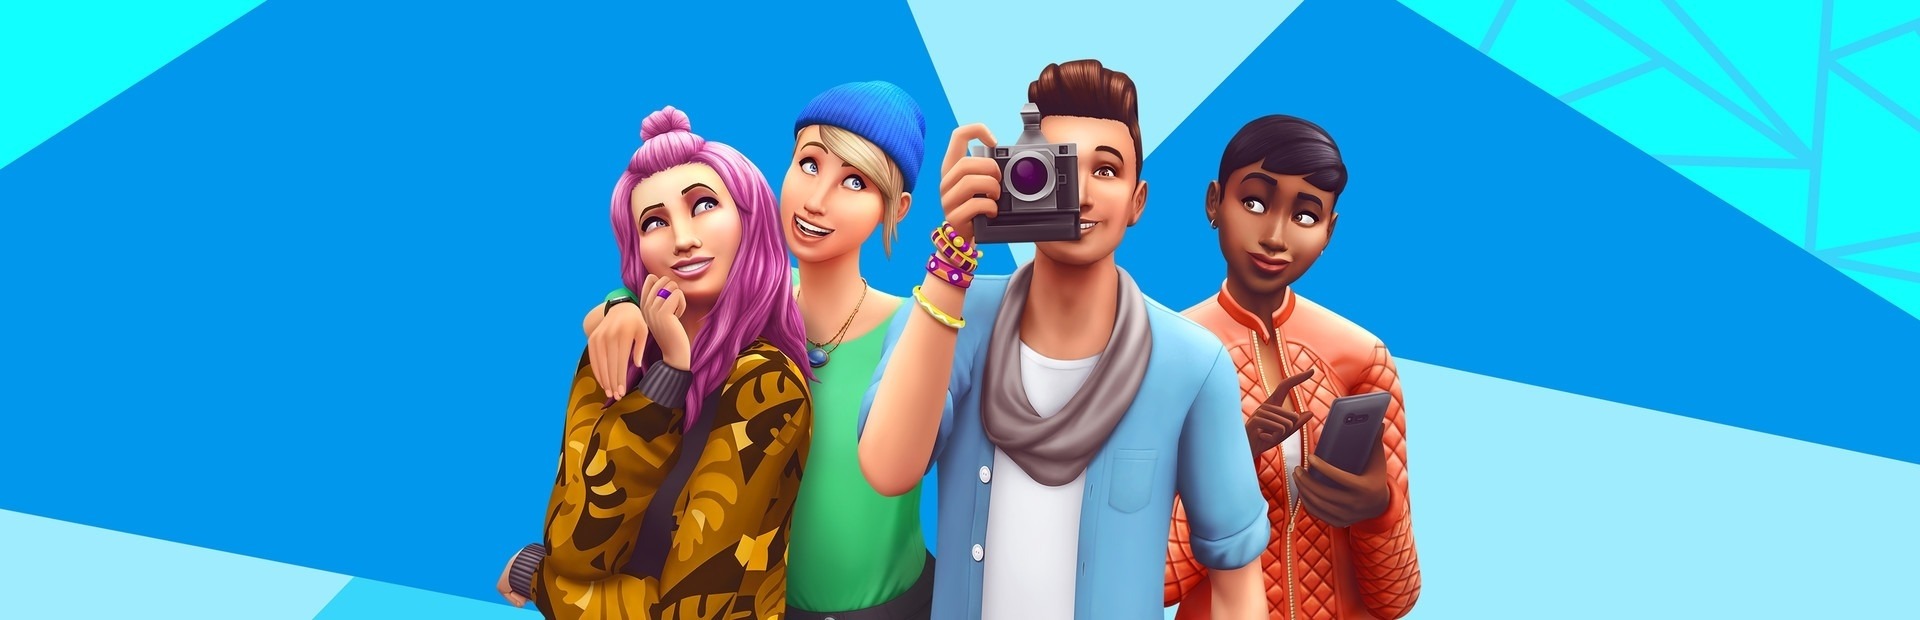 The Sims 4 + The Sims 4 Seasons